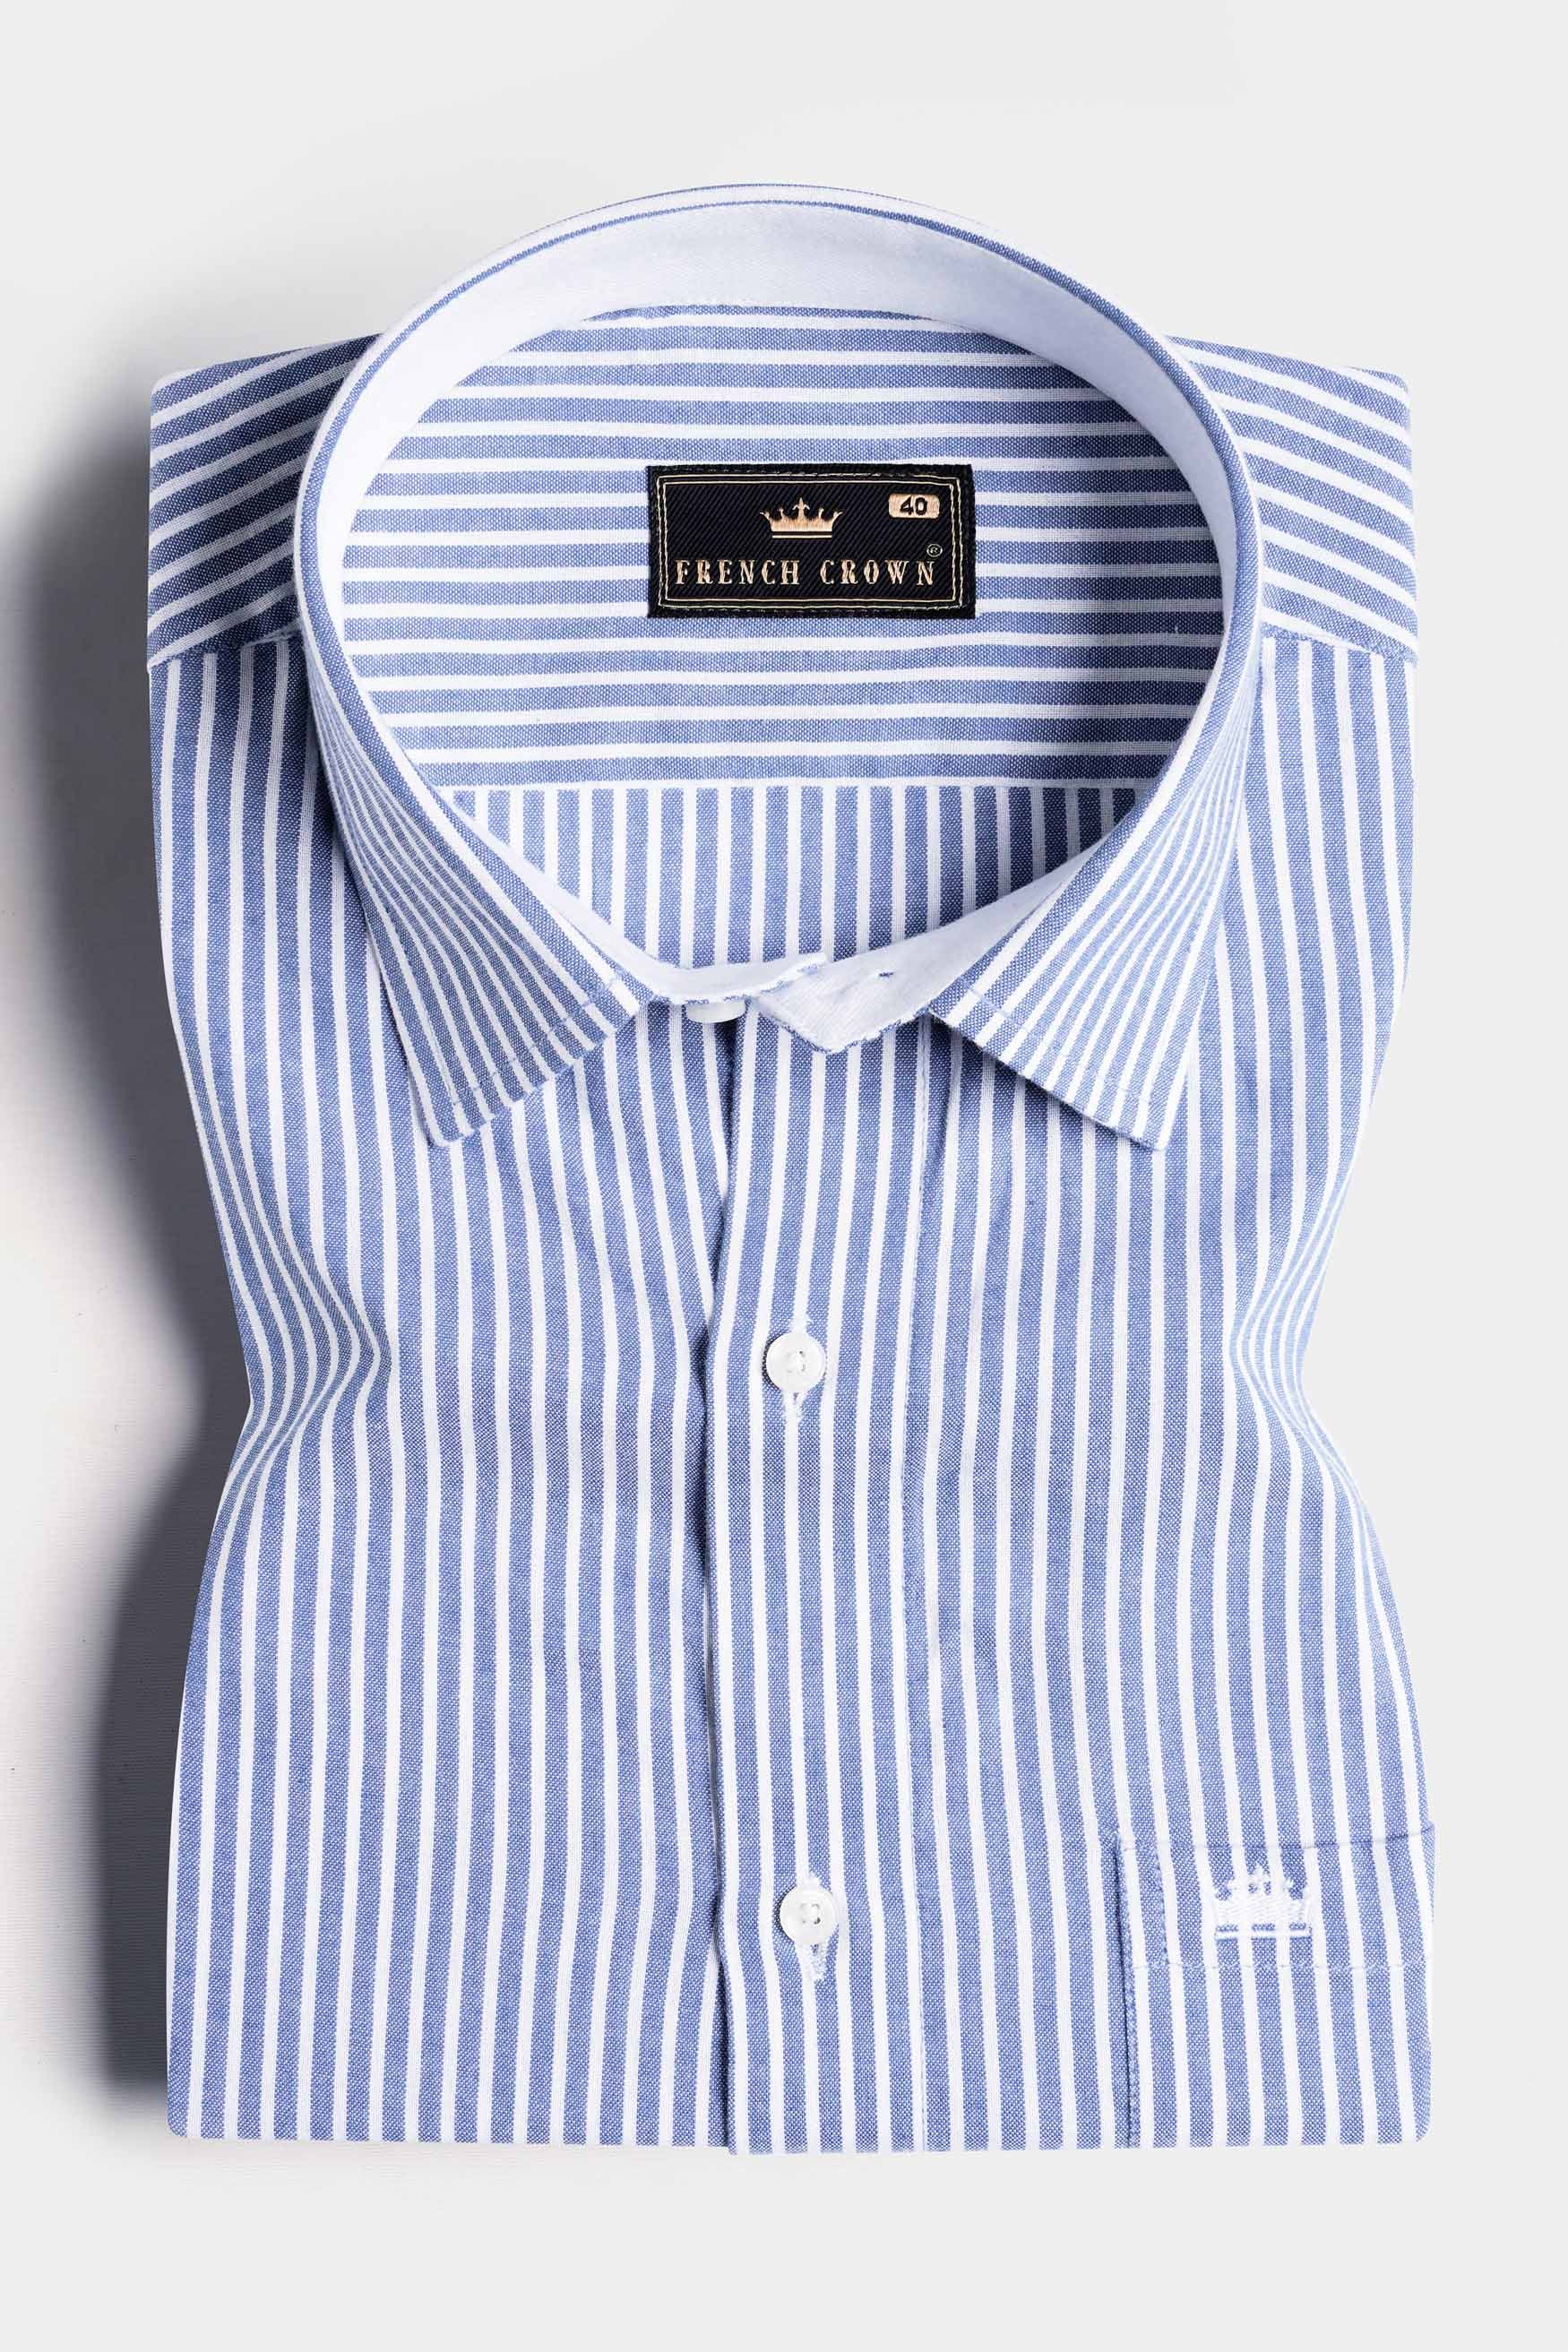 Yonder Blue Striped with White Hand Painted Royal Oxford Designer Shirt 6345-CP-SS-ART-38, 6345-CP-SS-ART-39, 6345-CP-SS-ART-40, 6345-CP-SS-ART-42, 6345-CP-SS-ART-44, 6345-CP-SS-ART-46, 6345-CP-SS-ART-48, 6345-CP-SS-ART-50, 6345-CP-SS-ART-52